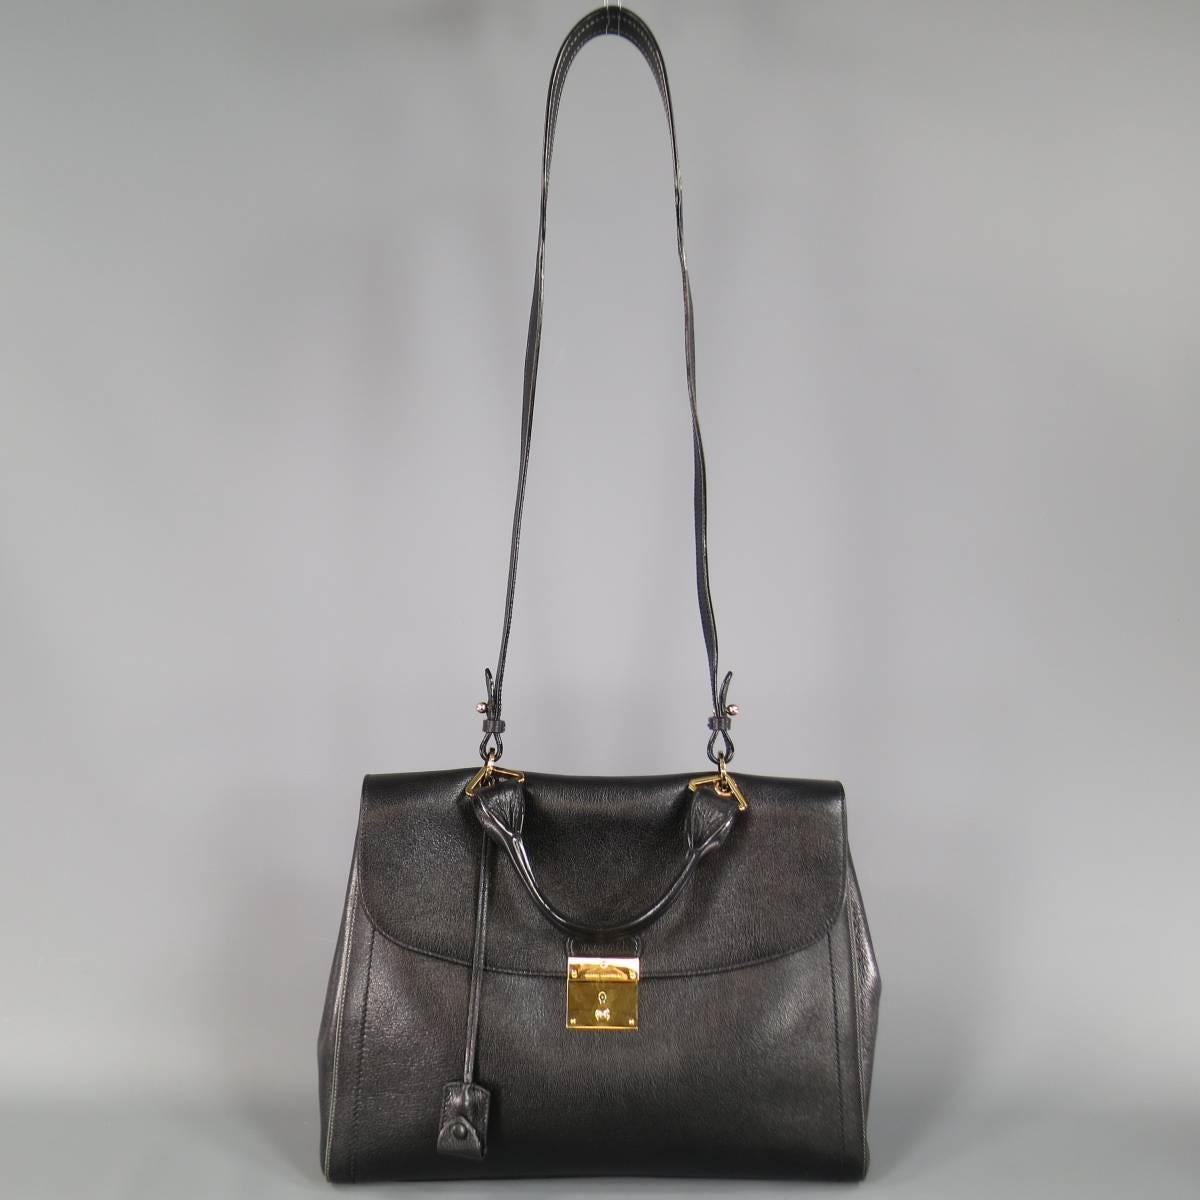 This gorgeous MARC JACOBS satchel handbag comes in  textured black leather and features a gold tone lock clasp closure, tan piping on sides, top handle, clochette with lock, and optional shoulder strap. Made in Italy.
Retails at $1495.00.

Brand